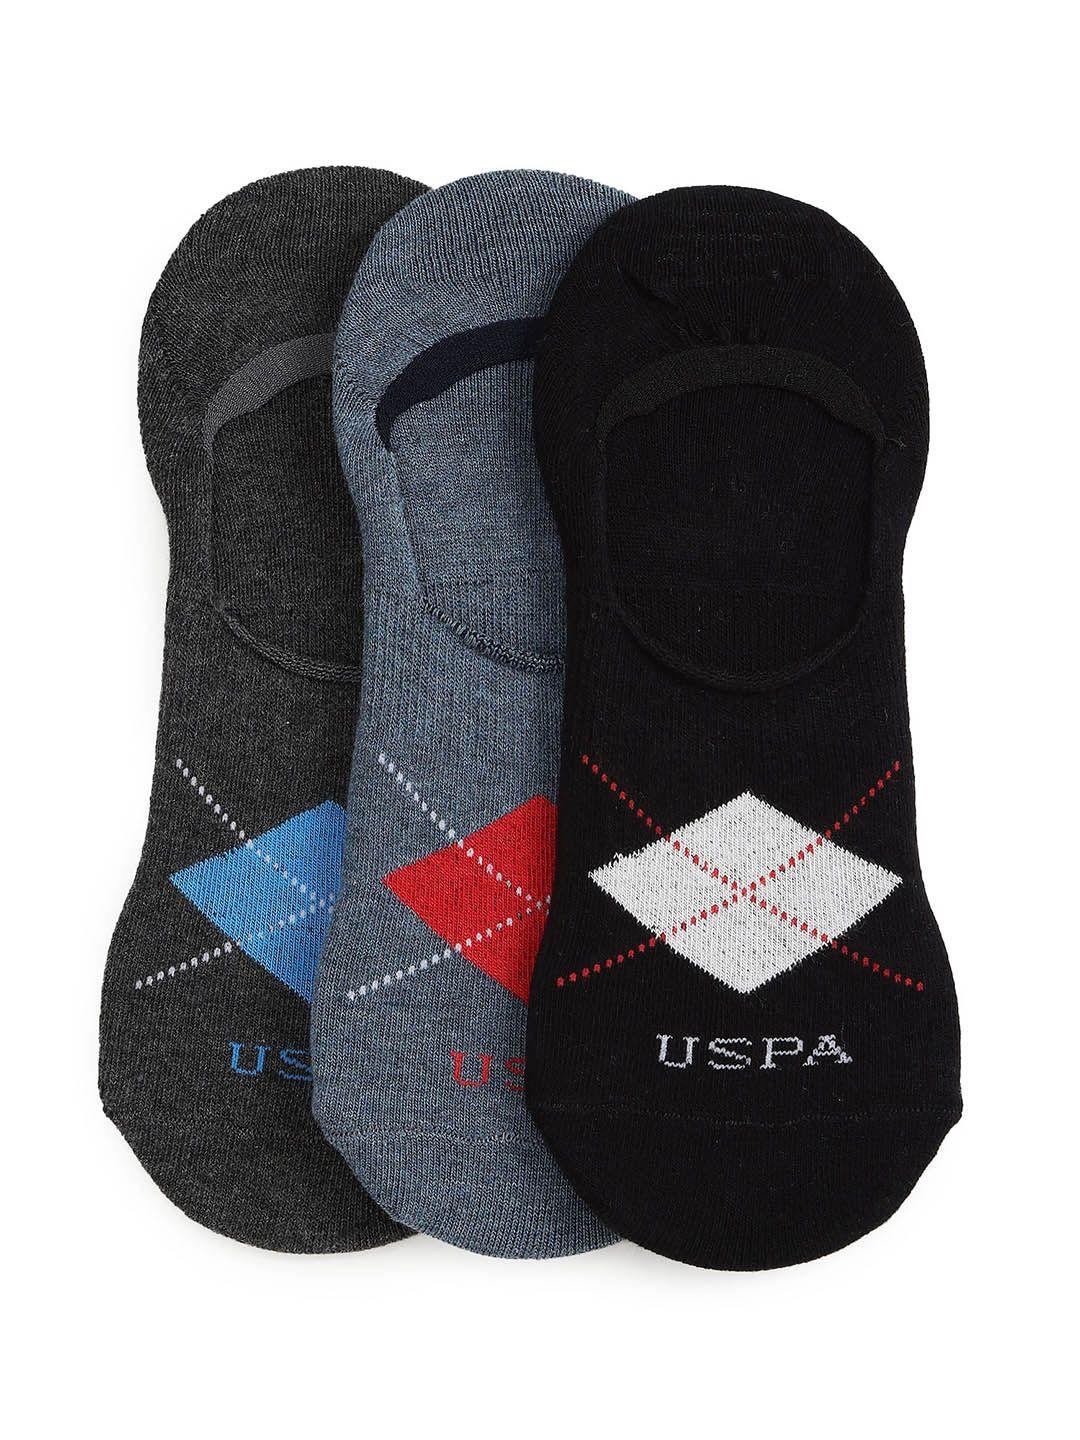 u.s. polo assn. men pack of 3 patterned no show socks